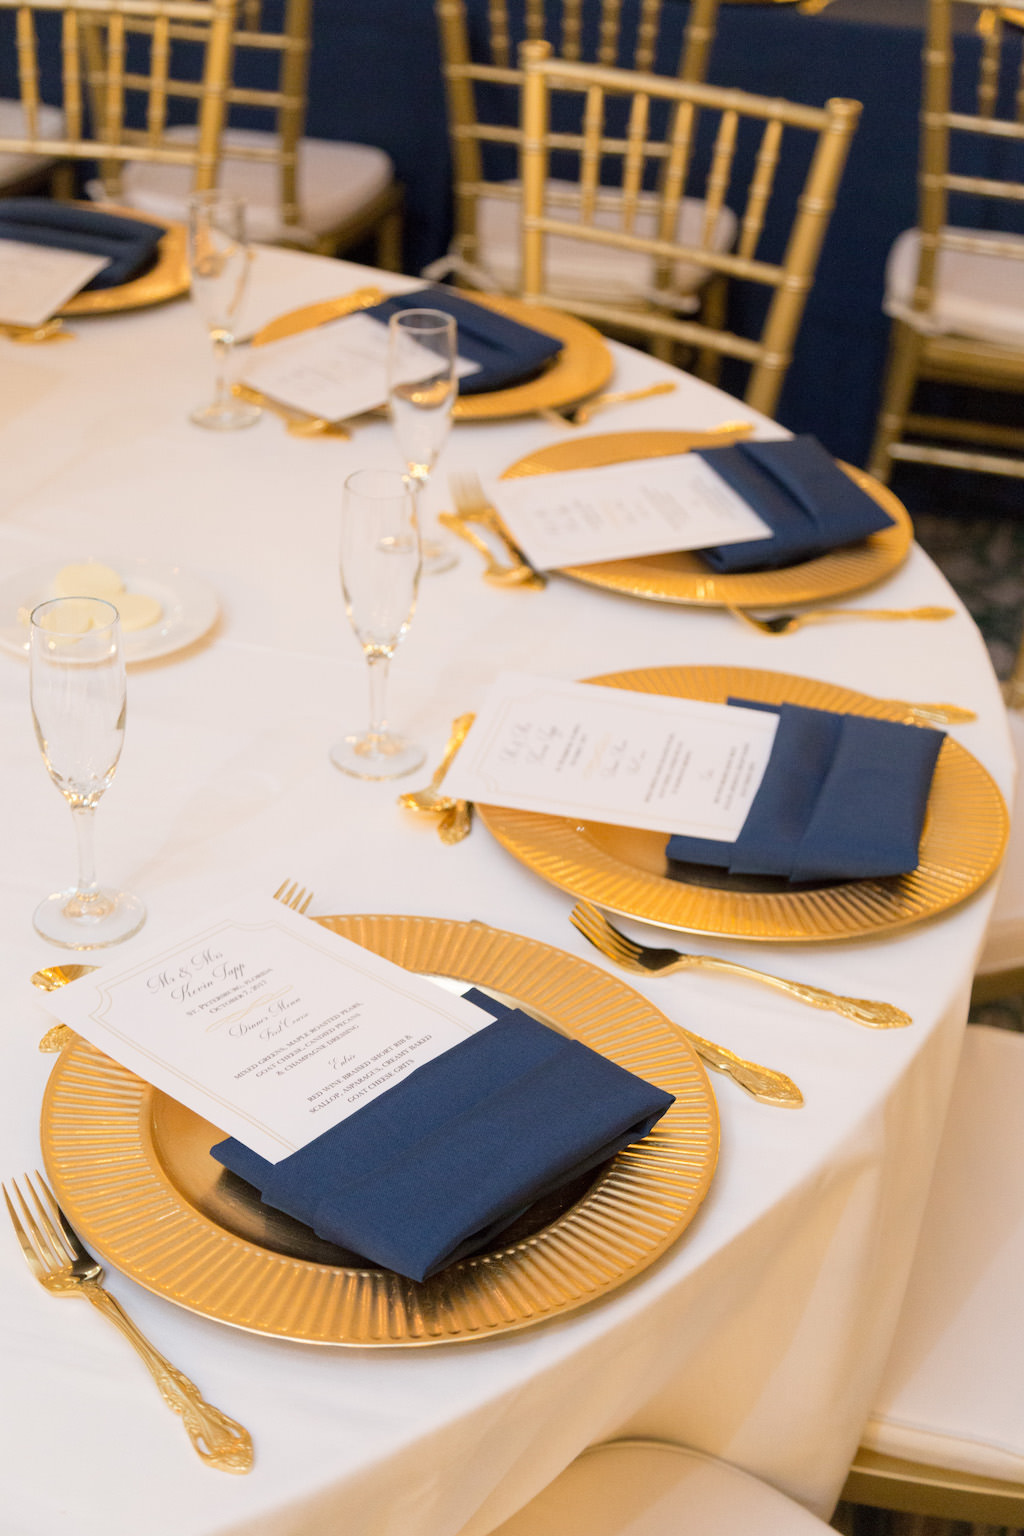 Southern Elegance Wedding Reception Round Table Setting with Gold Chargers, White Printed Menus in Navy BLue Napkins, Blush Linens, and Gold CHiavari Chairs and Flatware